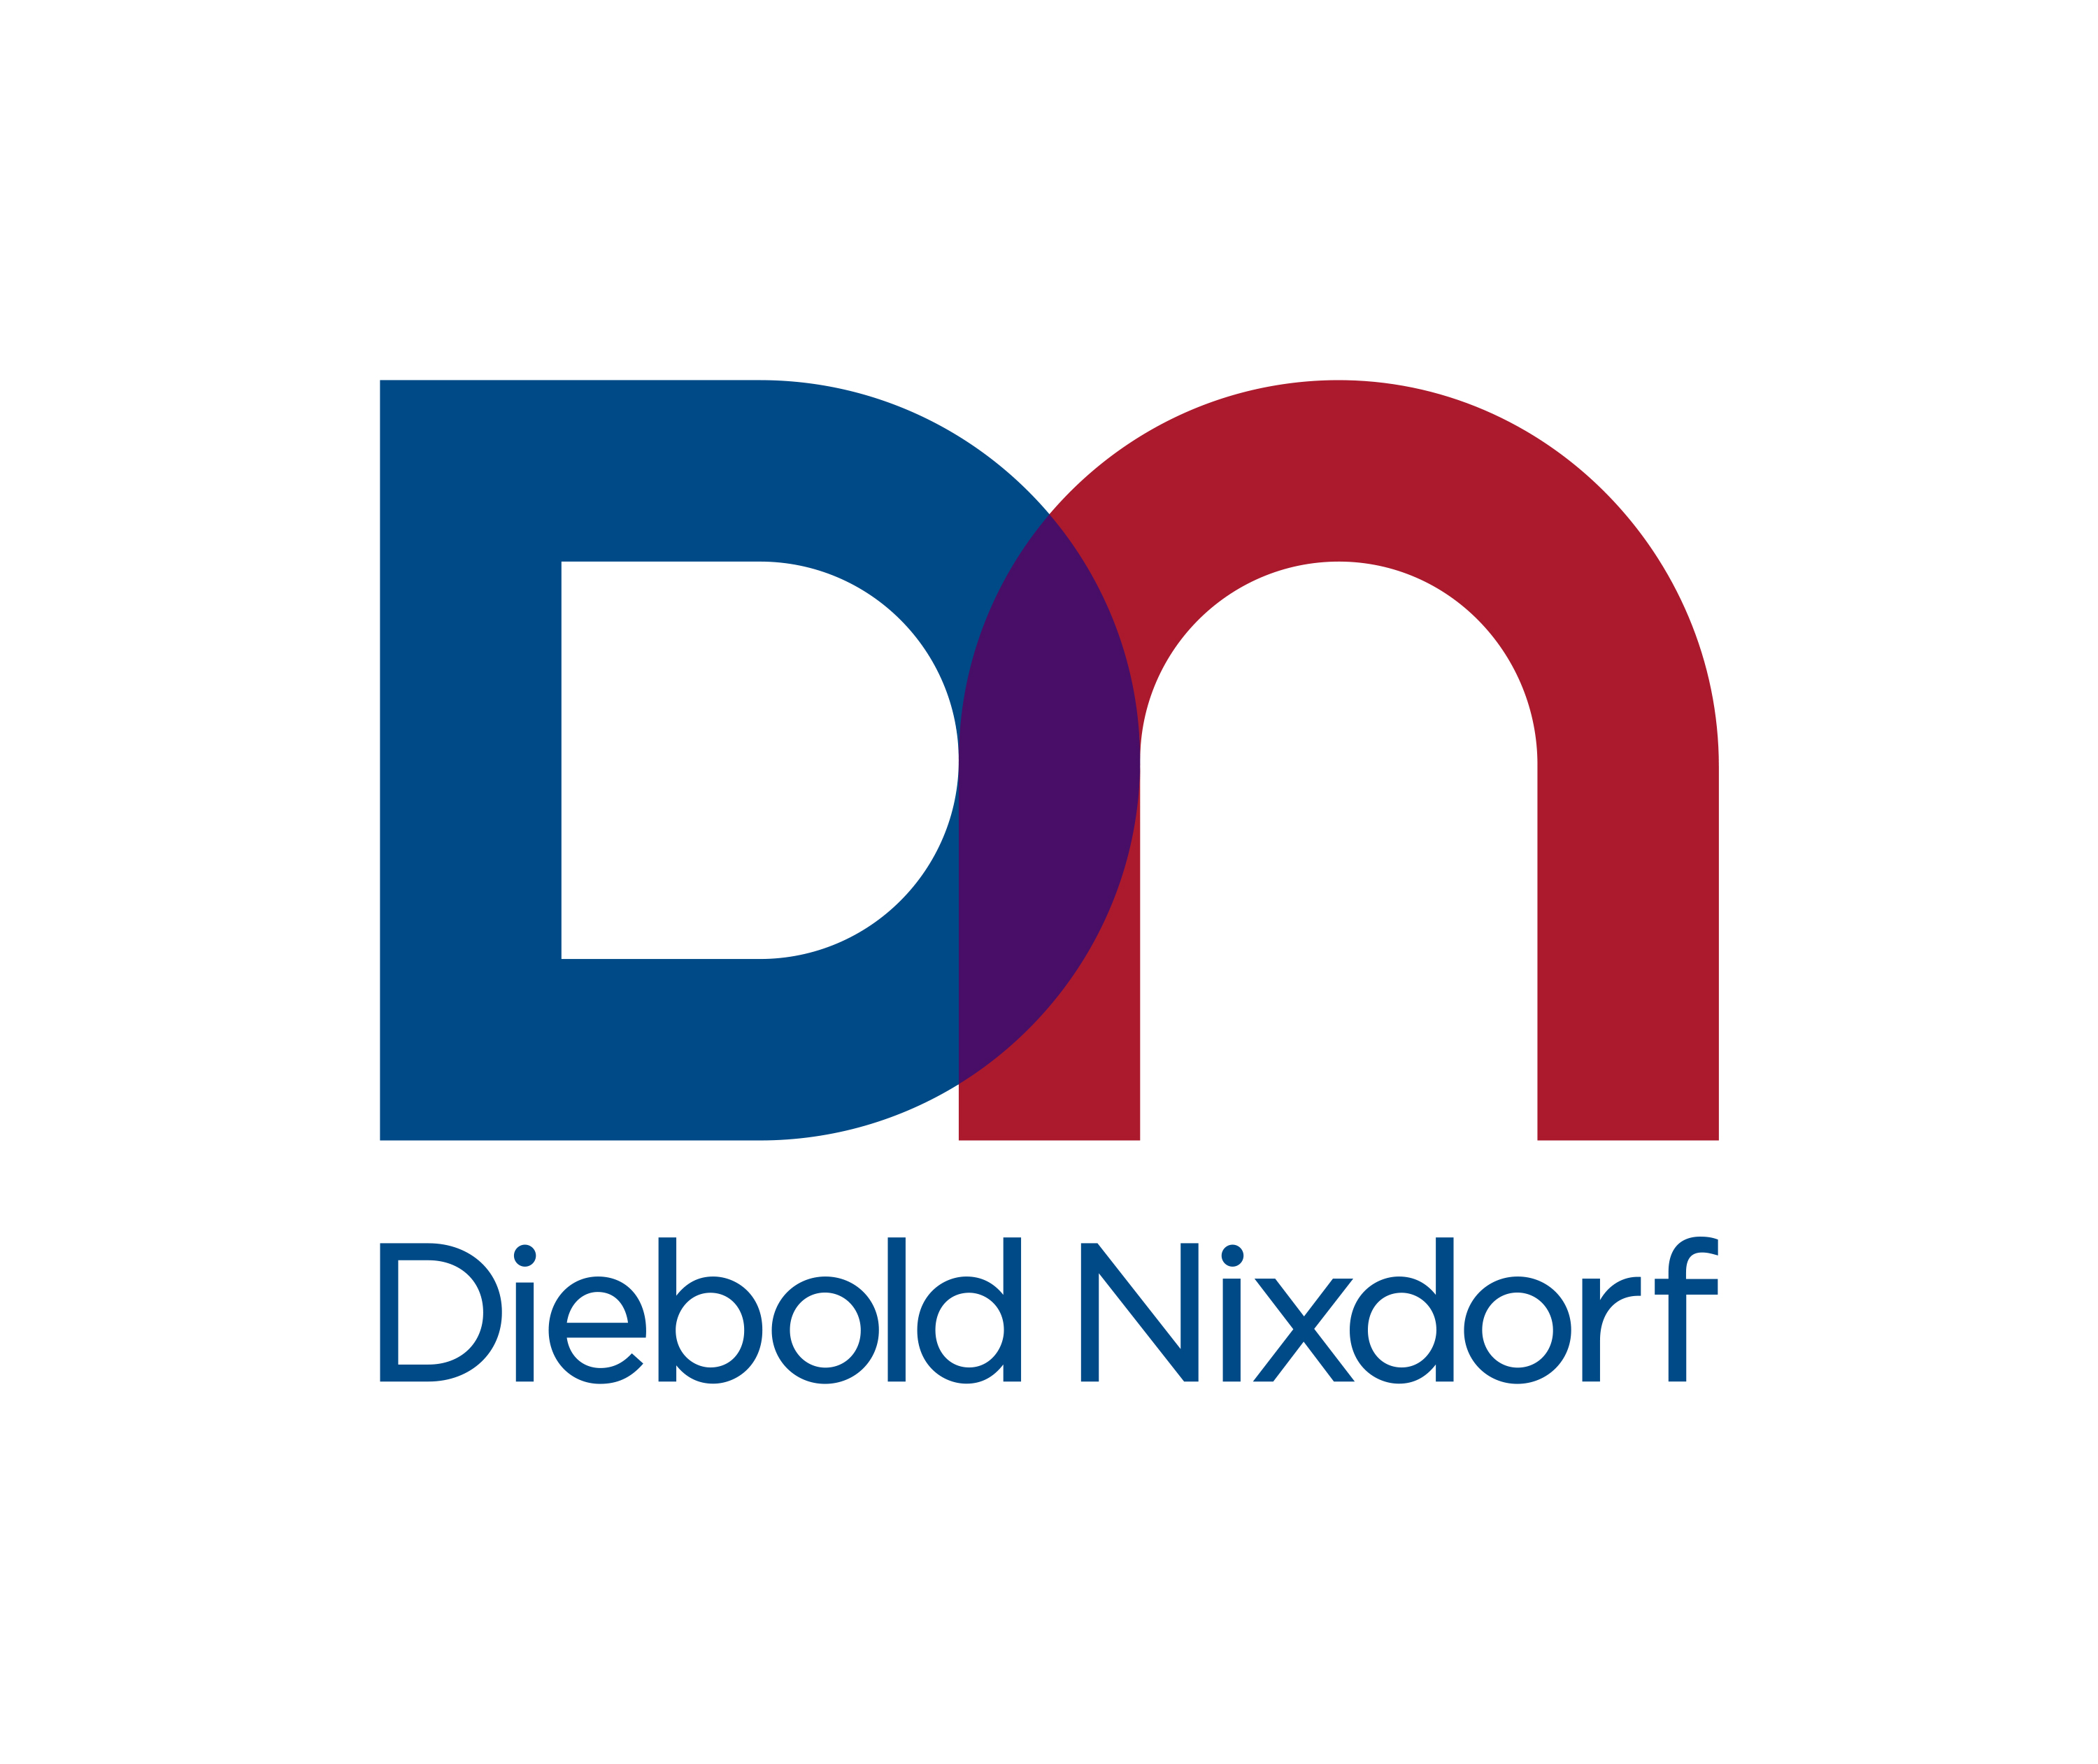 Diebold Nixdorf, Incorporated (NYSE: DBD) is a world leader in enabling connected commerce. We automate, digitize and transform the way people bank and shop.